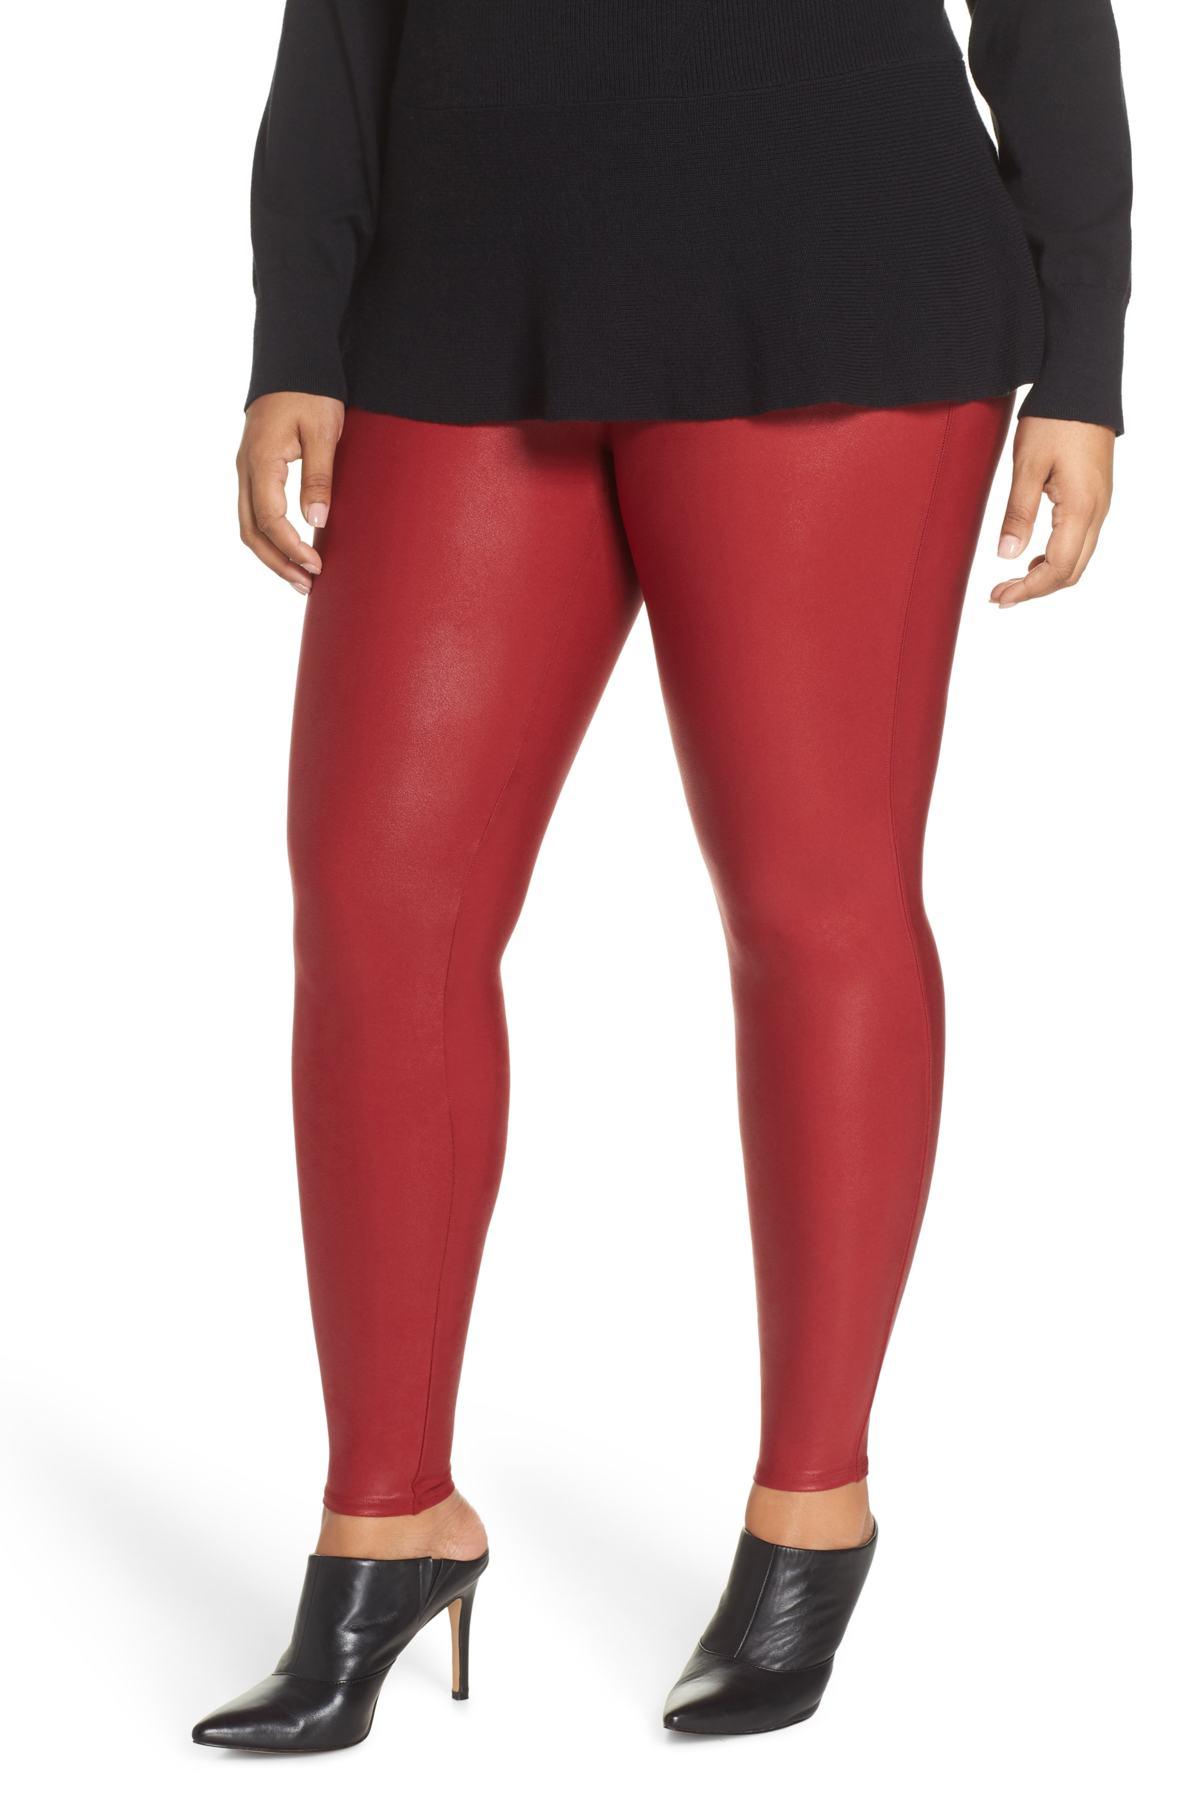 Spanx (r) Faux Leather Leggings (plus Size) in Crimson (Red) - Lyst